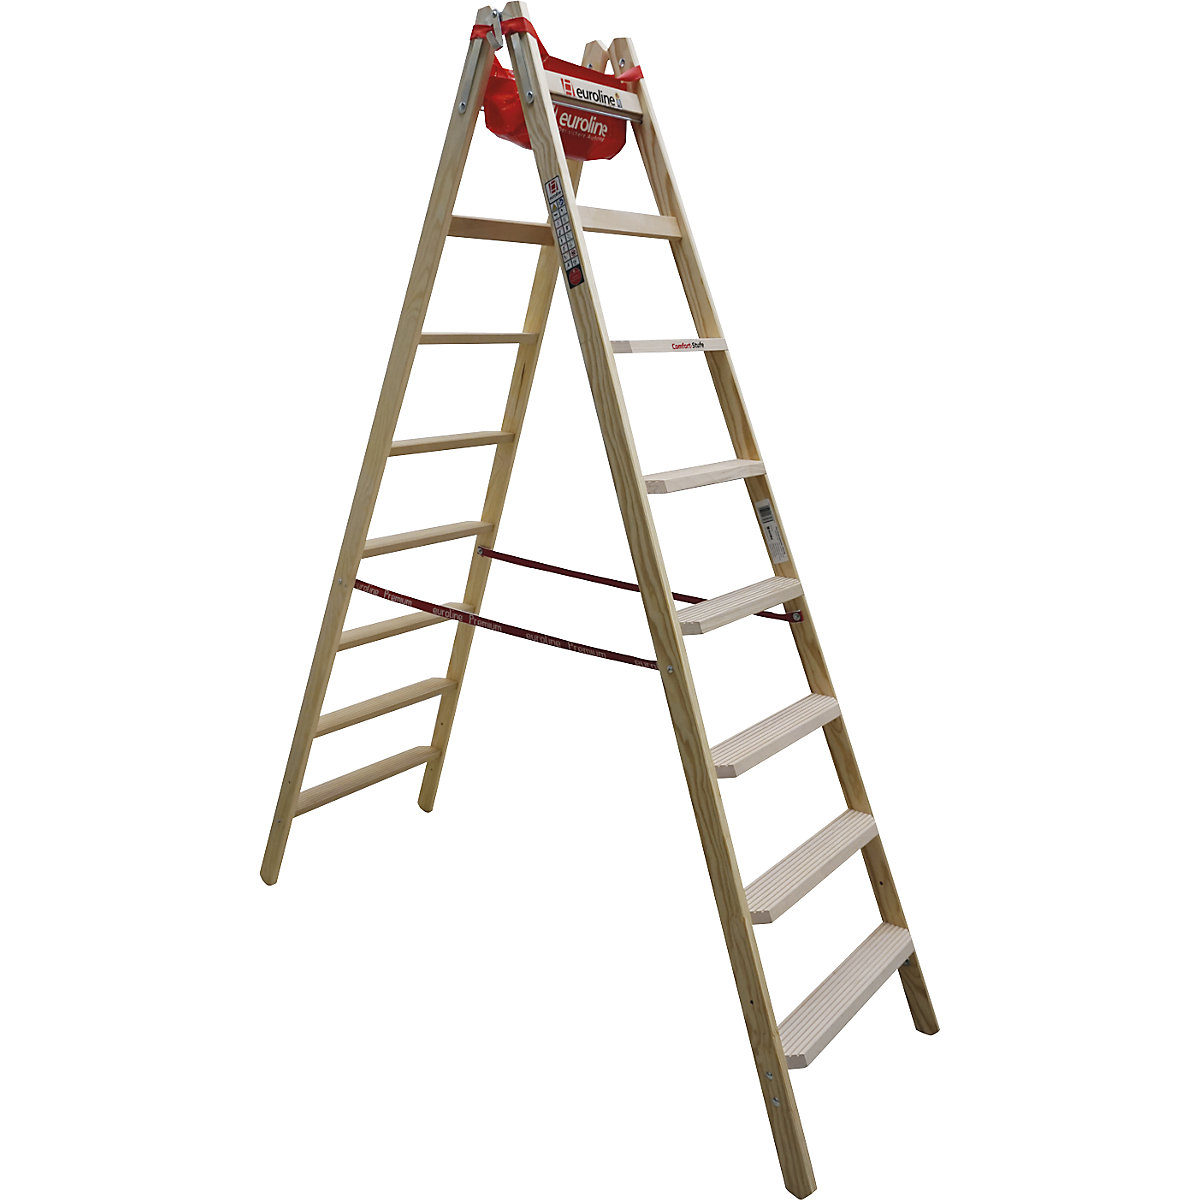 Wooden step ladder with comfort steps – euroline, double sided access, 2 x 8 steps-5